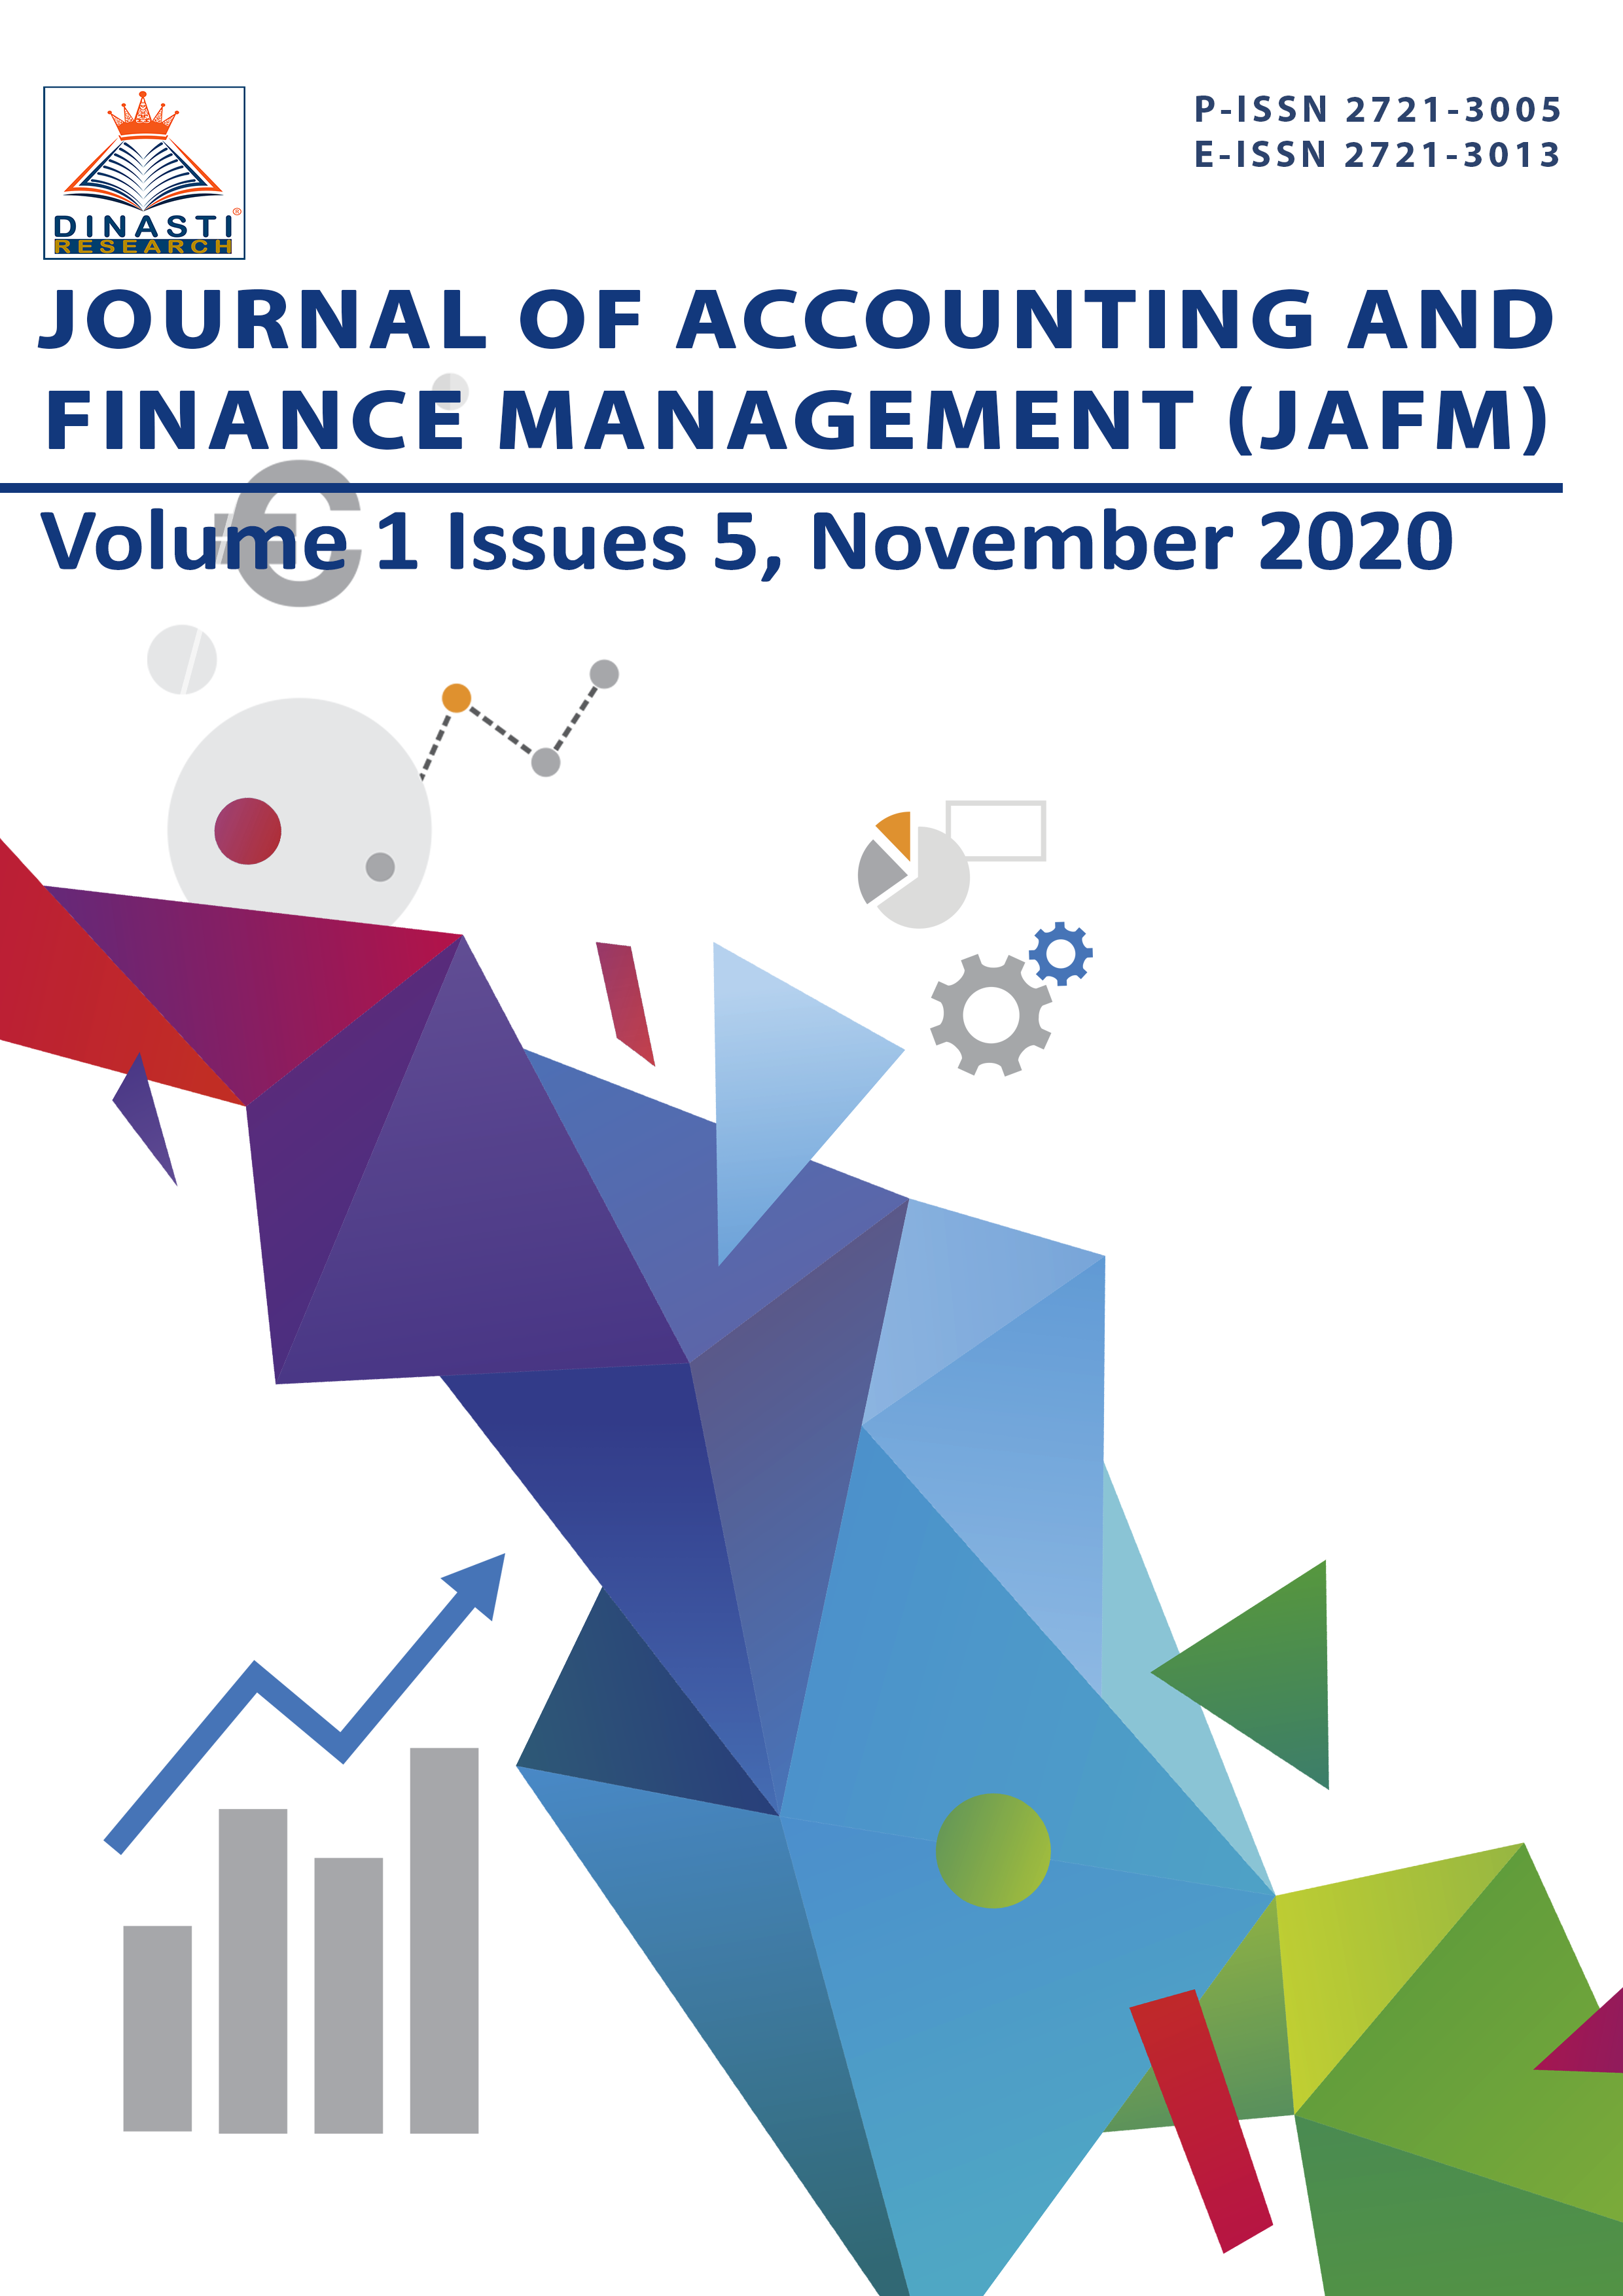 					View Vol. 1 No. 5 (2020): Journal of Accounting and Finance Management (November-December 2020)
				